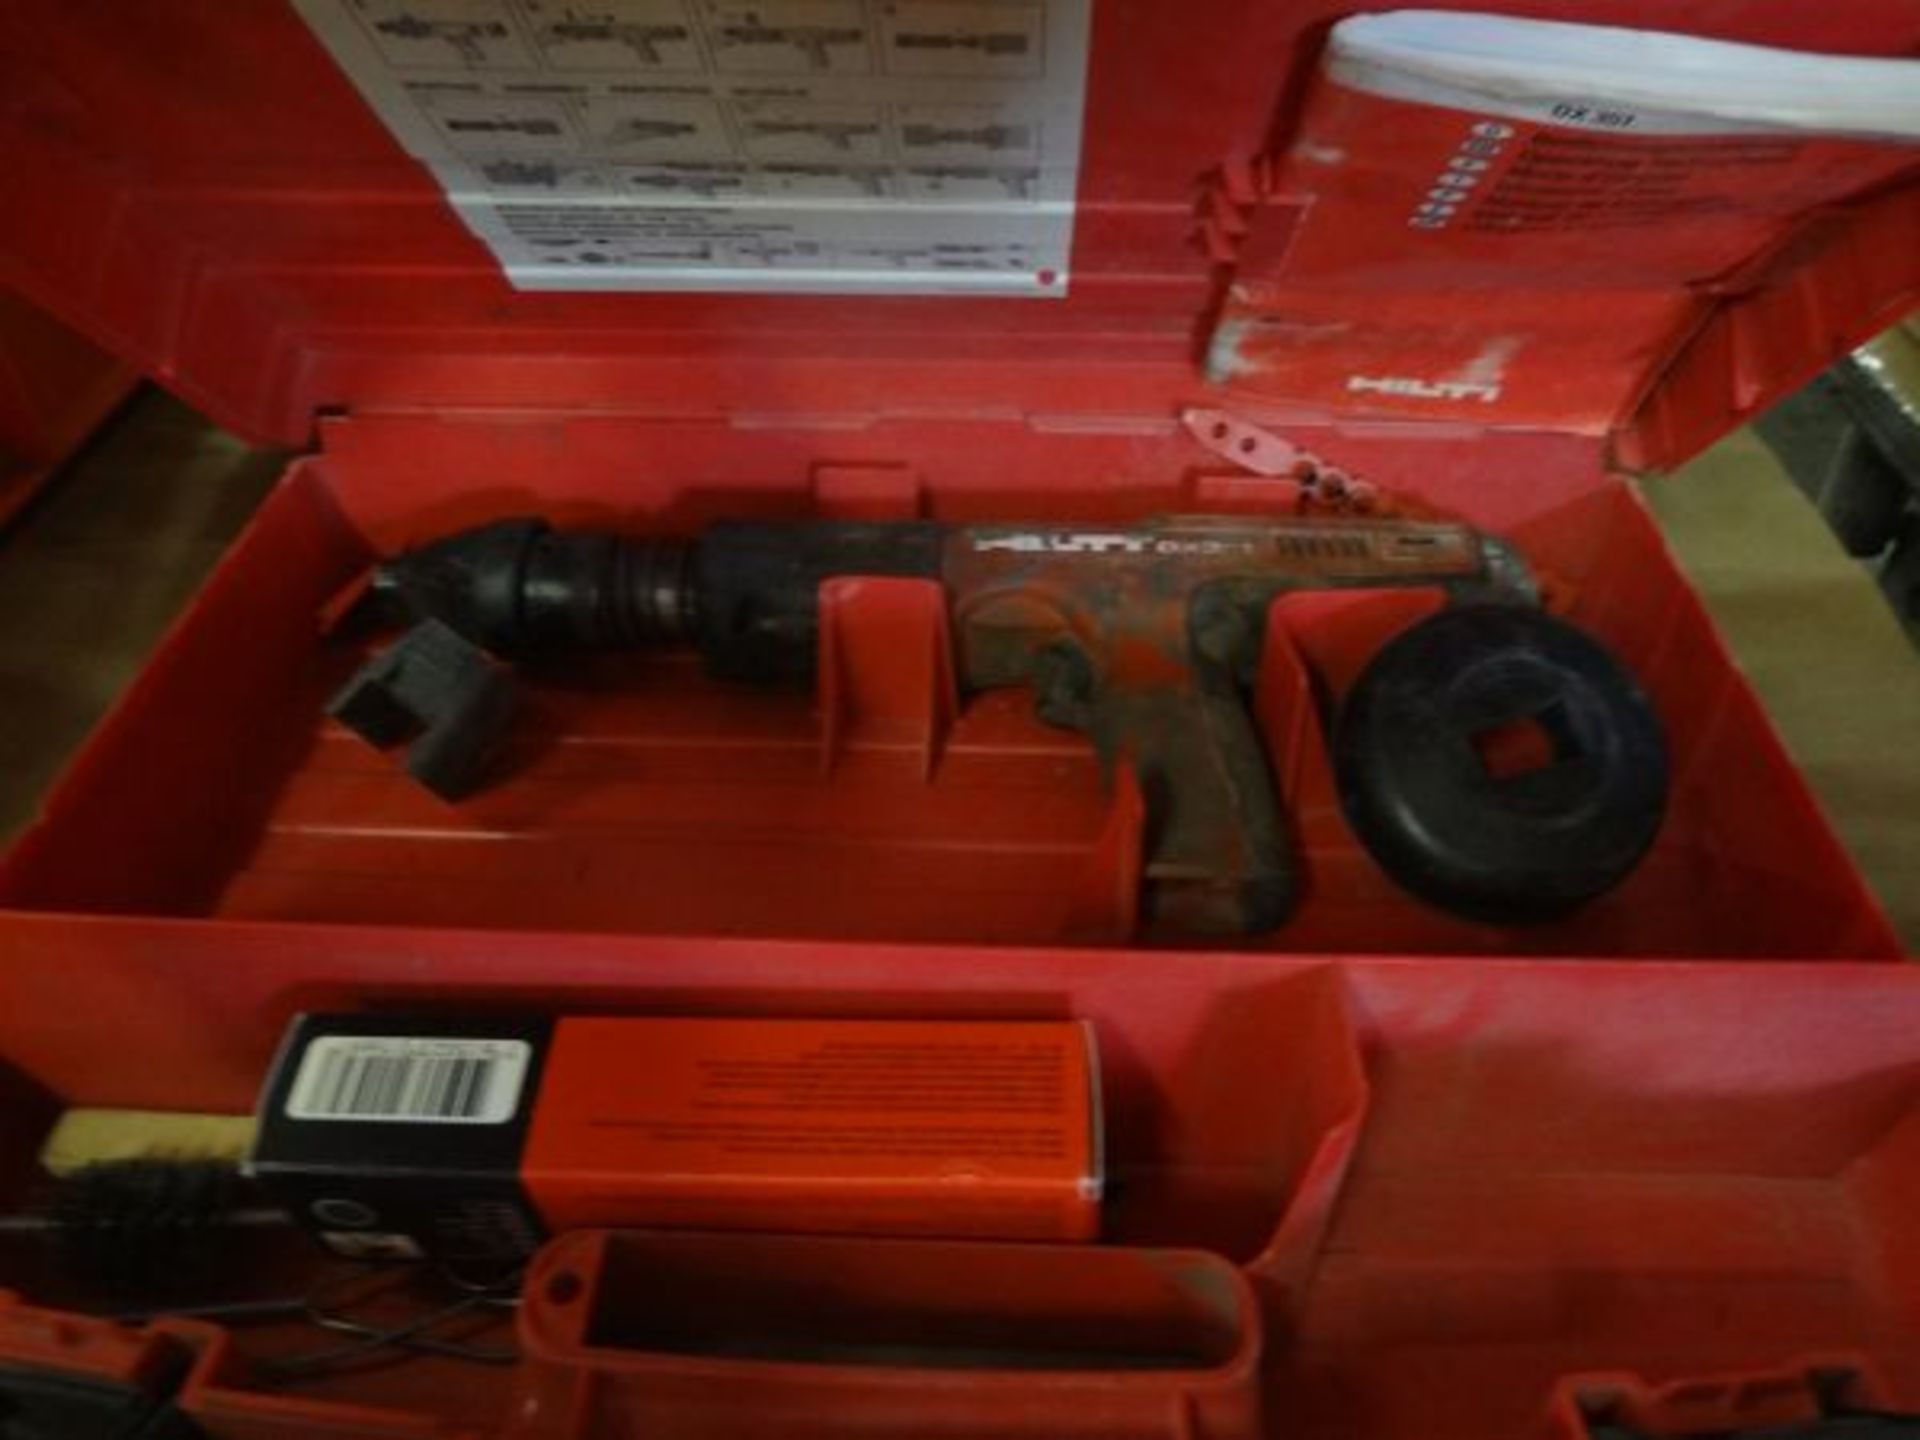 HILTI MODEL DX351 POWDER ACTUATED TOOL